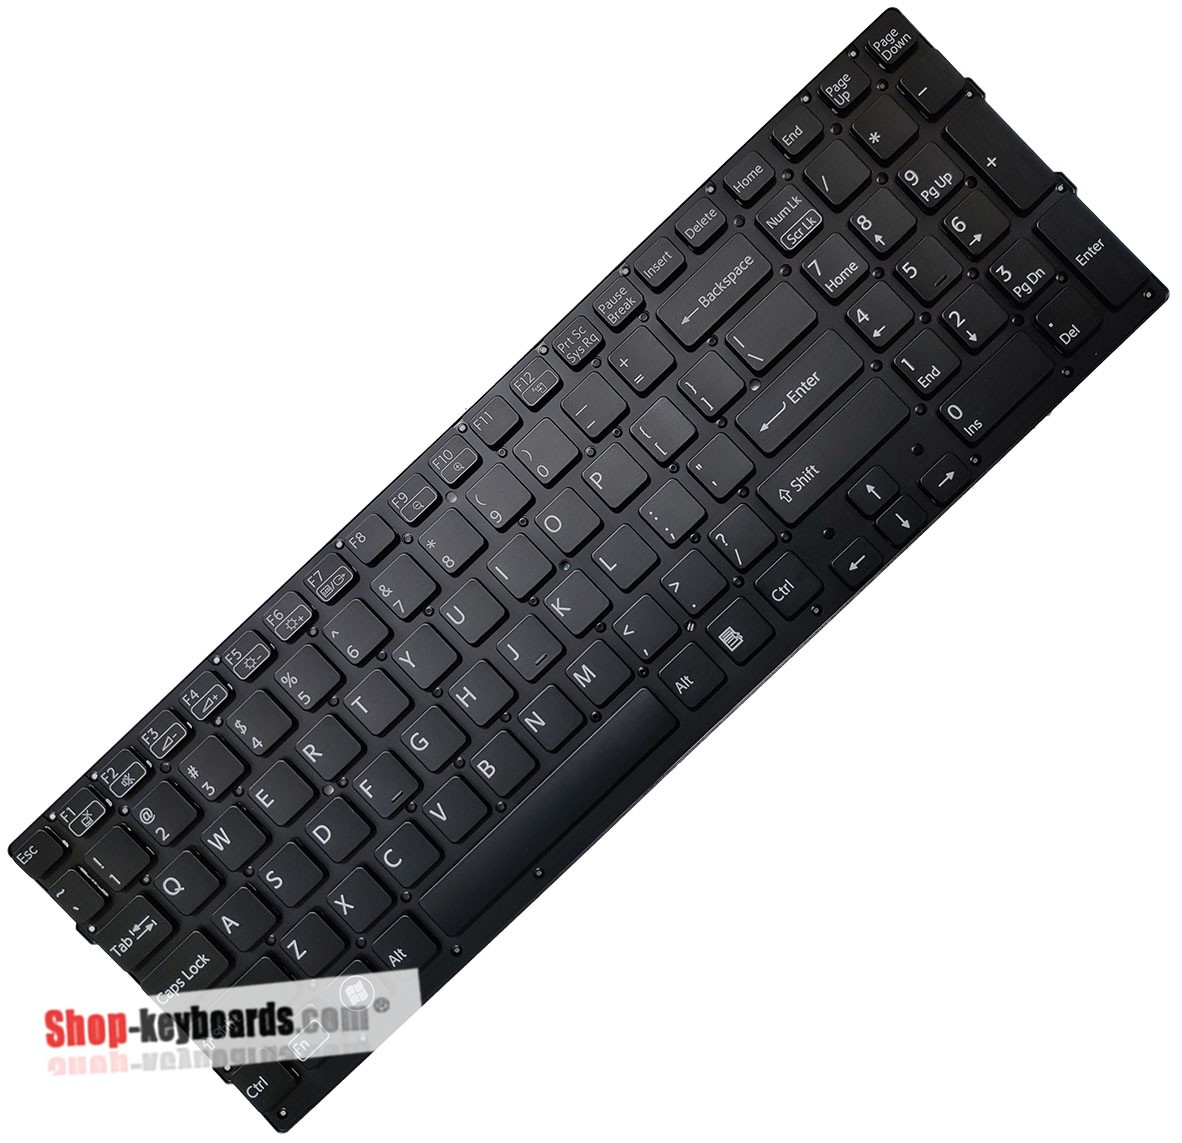 Sony VAIO VPC-F24Q1E Keyboard replacement